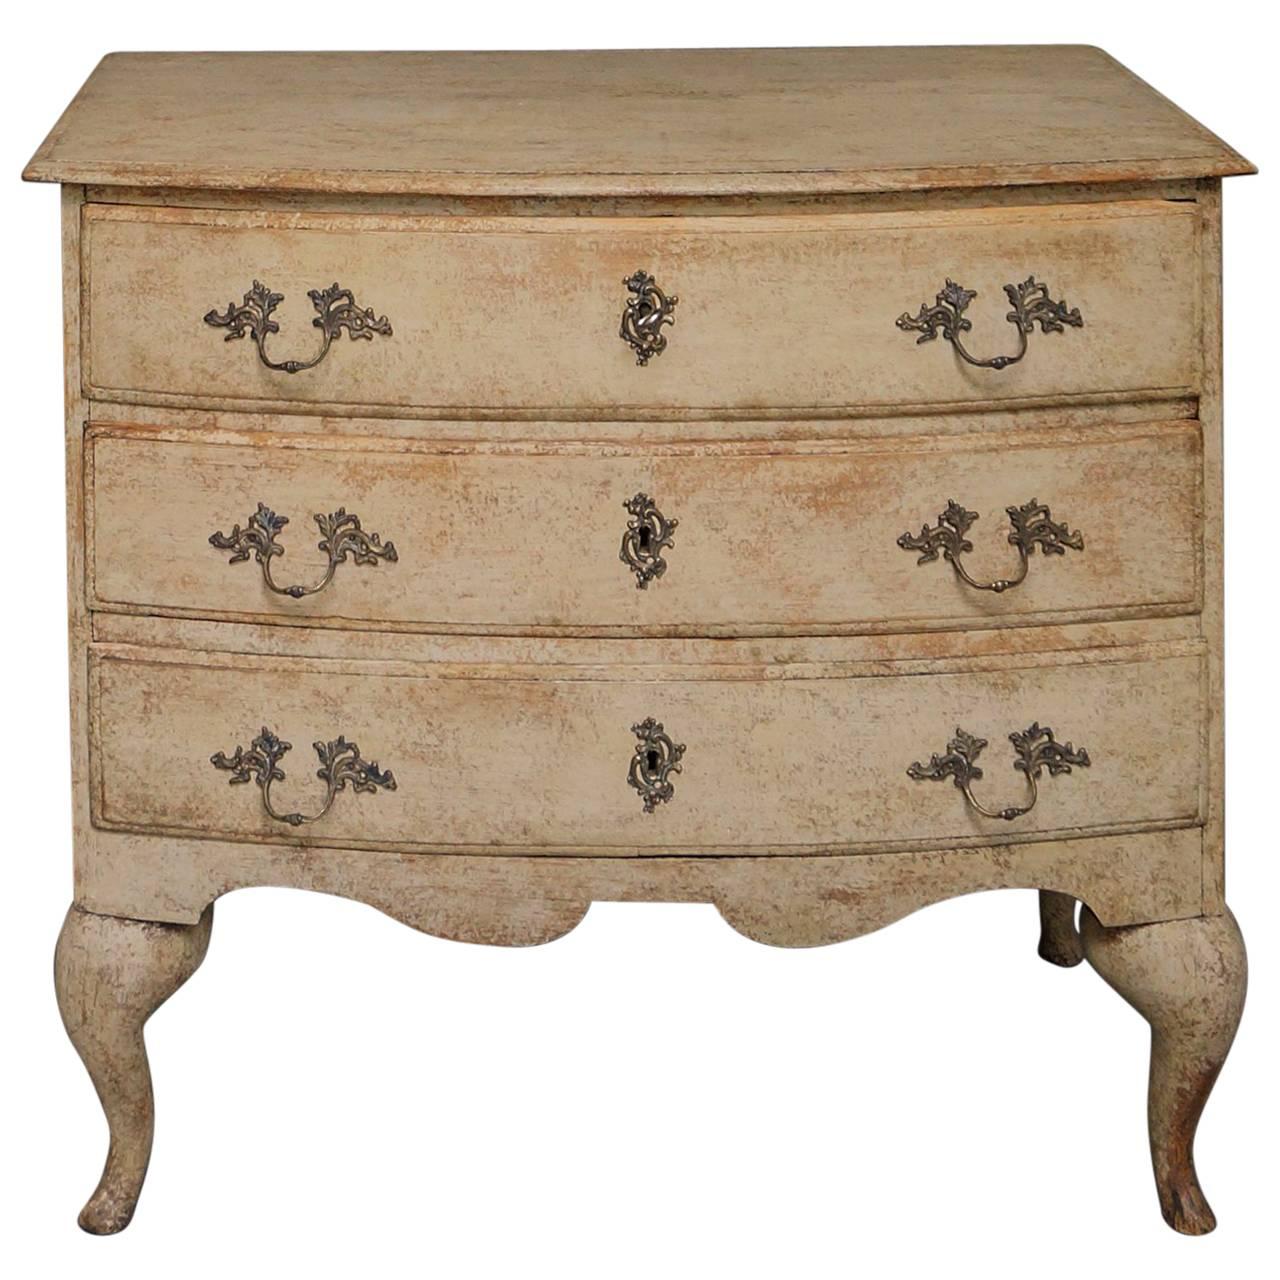 Period Swedish Rococo Chest of Drawers